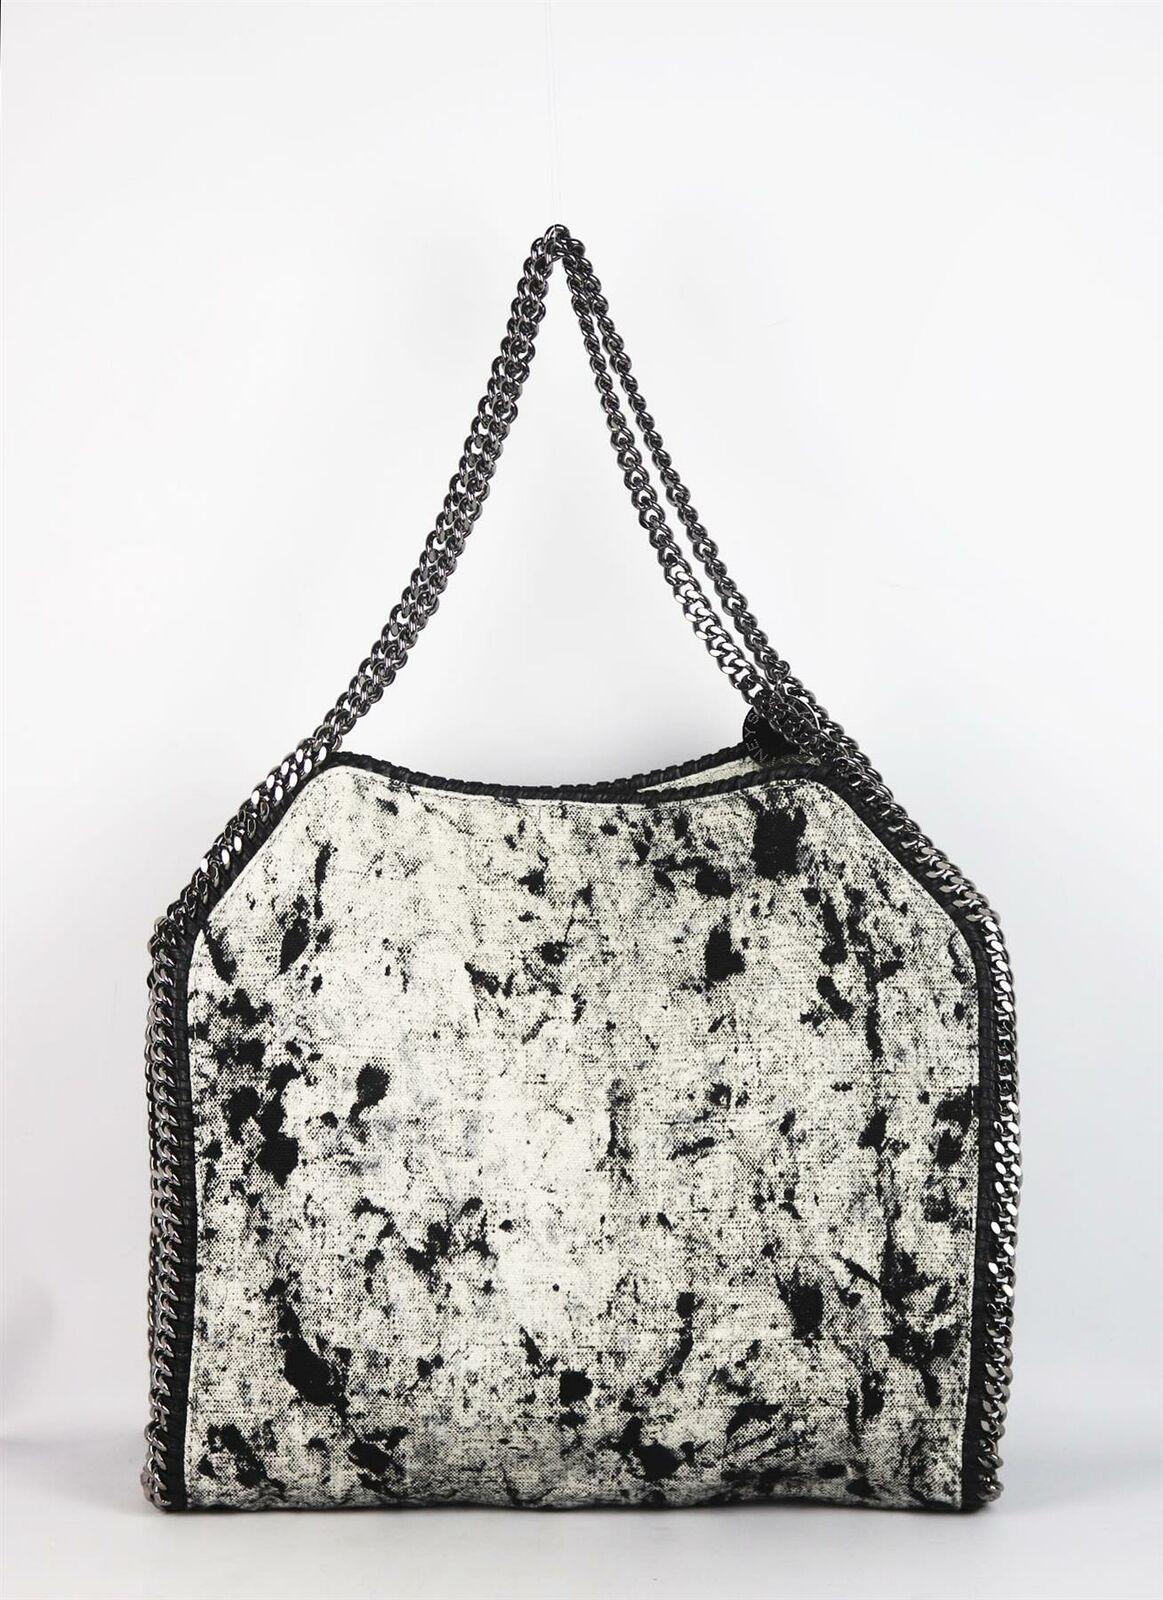 Stella McCartney is celebrated for her use sustainable materials - this medium 'Falabella' bag is crafted from the label's signature bleached denim, trimmed with whipstitched dark-silver chains, it's sized to hold your evening essentials and has a